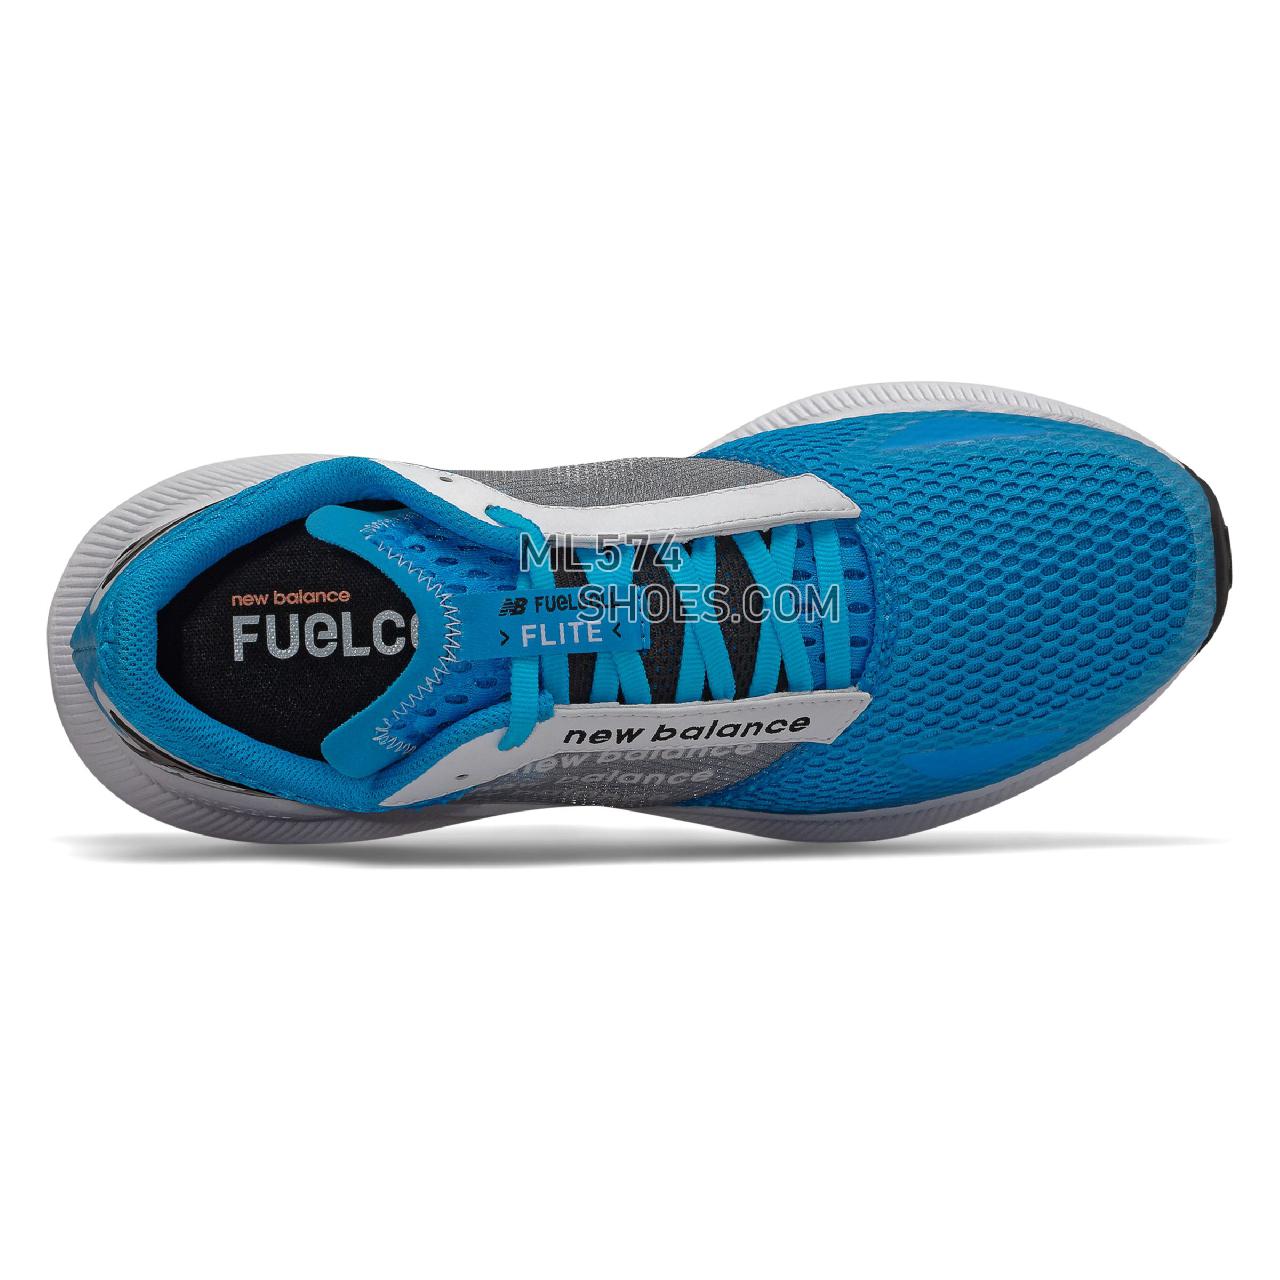 New Balance FuelCell Flite - Men's Neutral Running - Vision Blue with White and Black - MFCFLLV